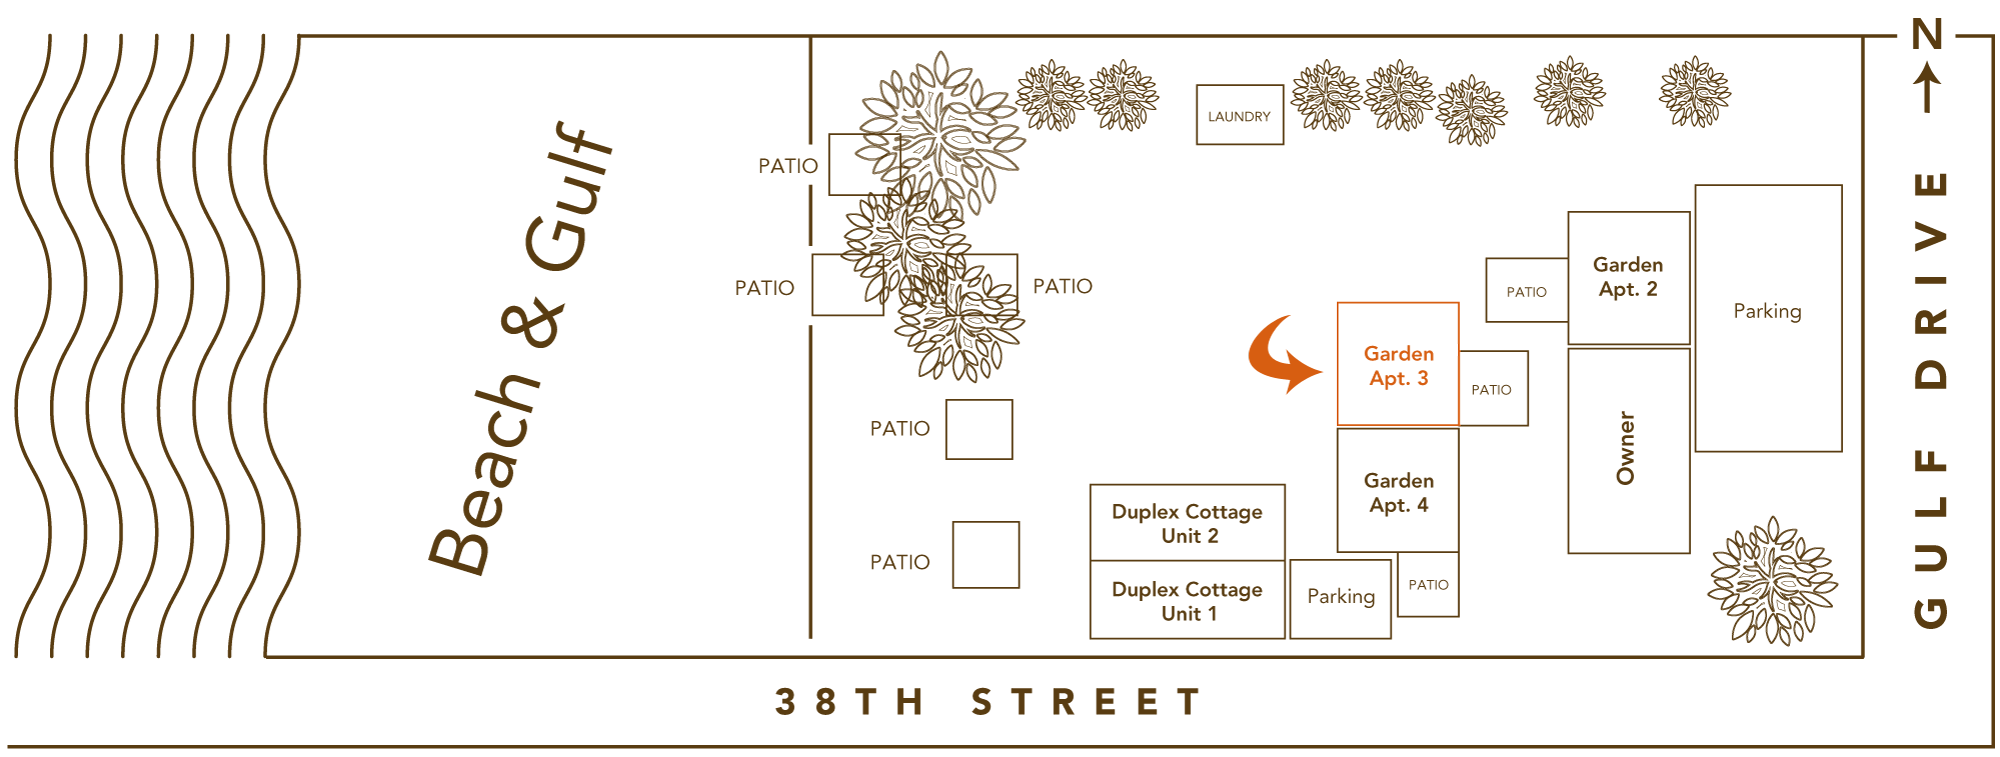 Bamboo Apartments Site Plan